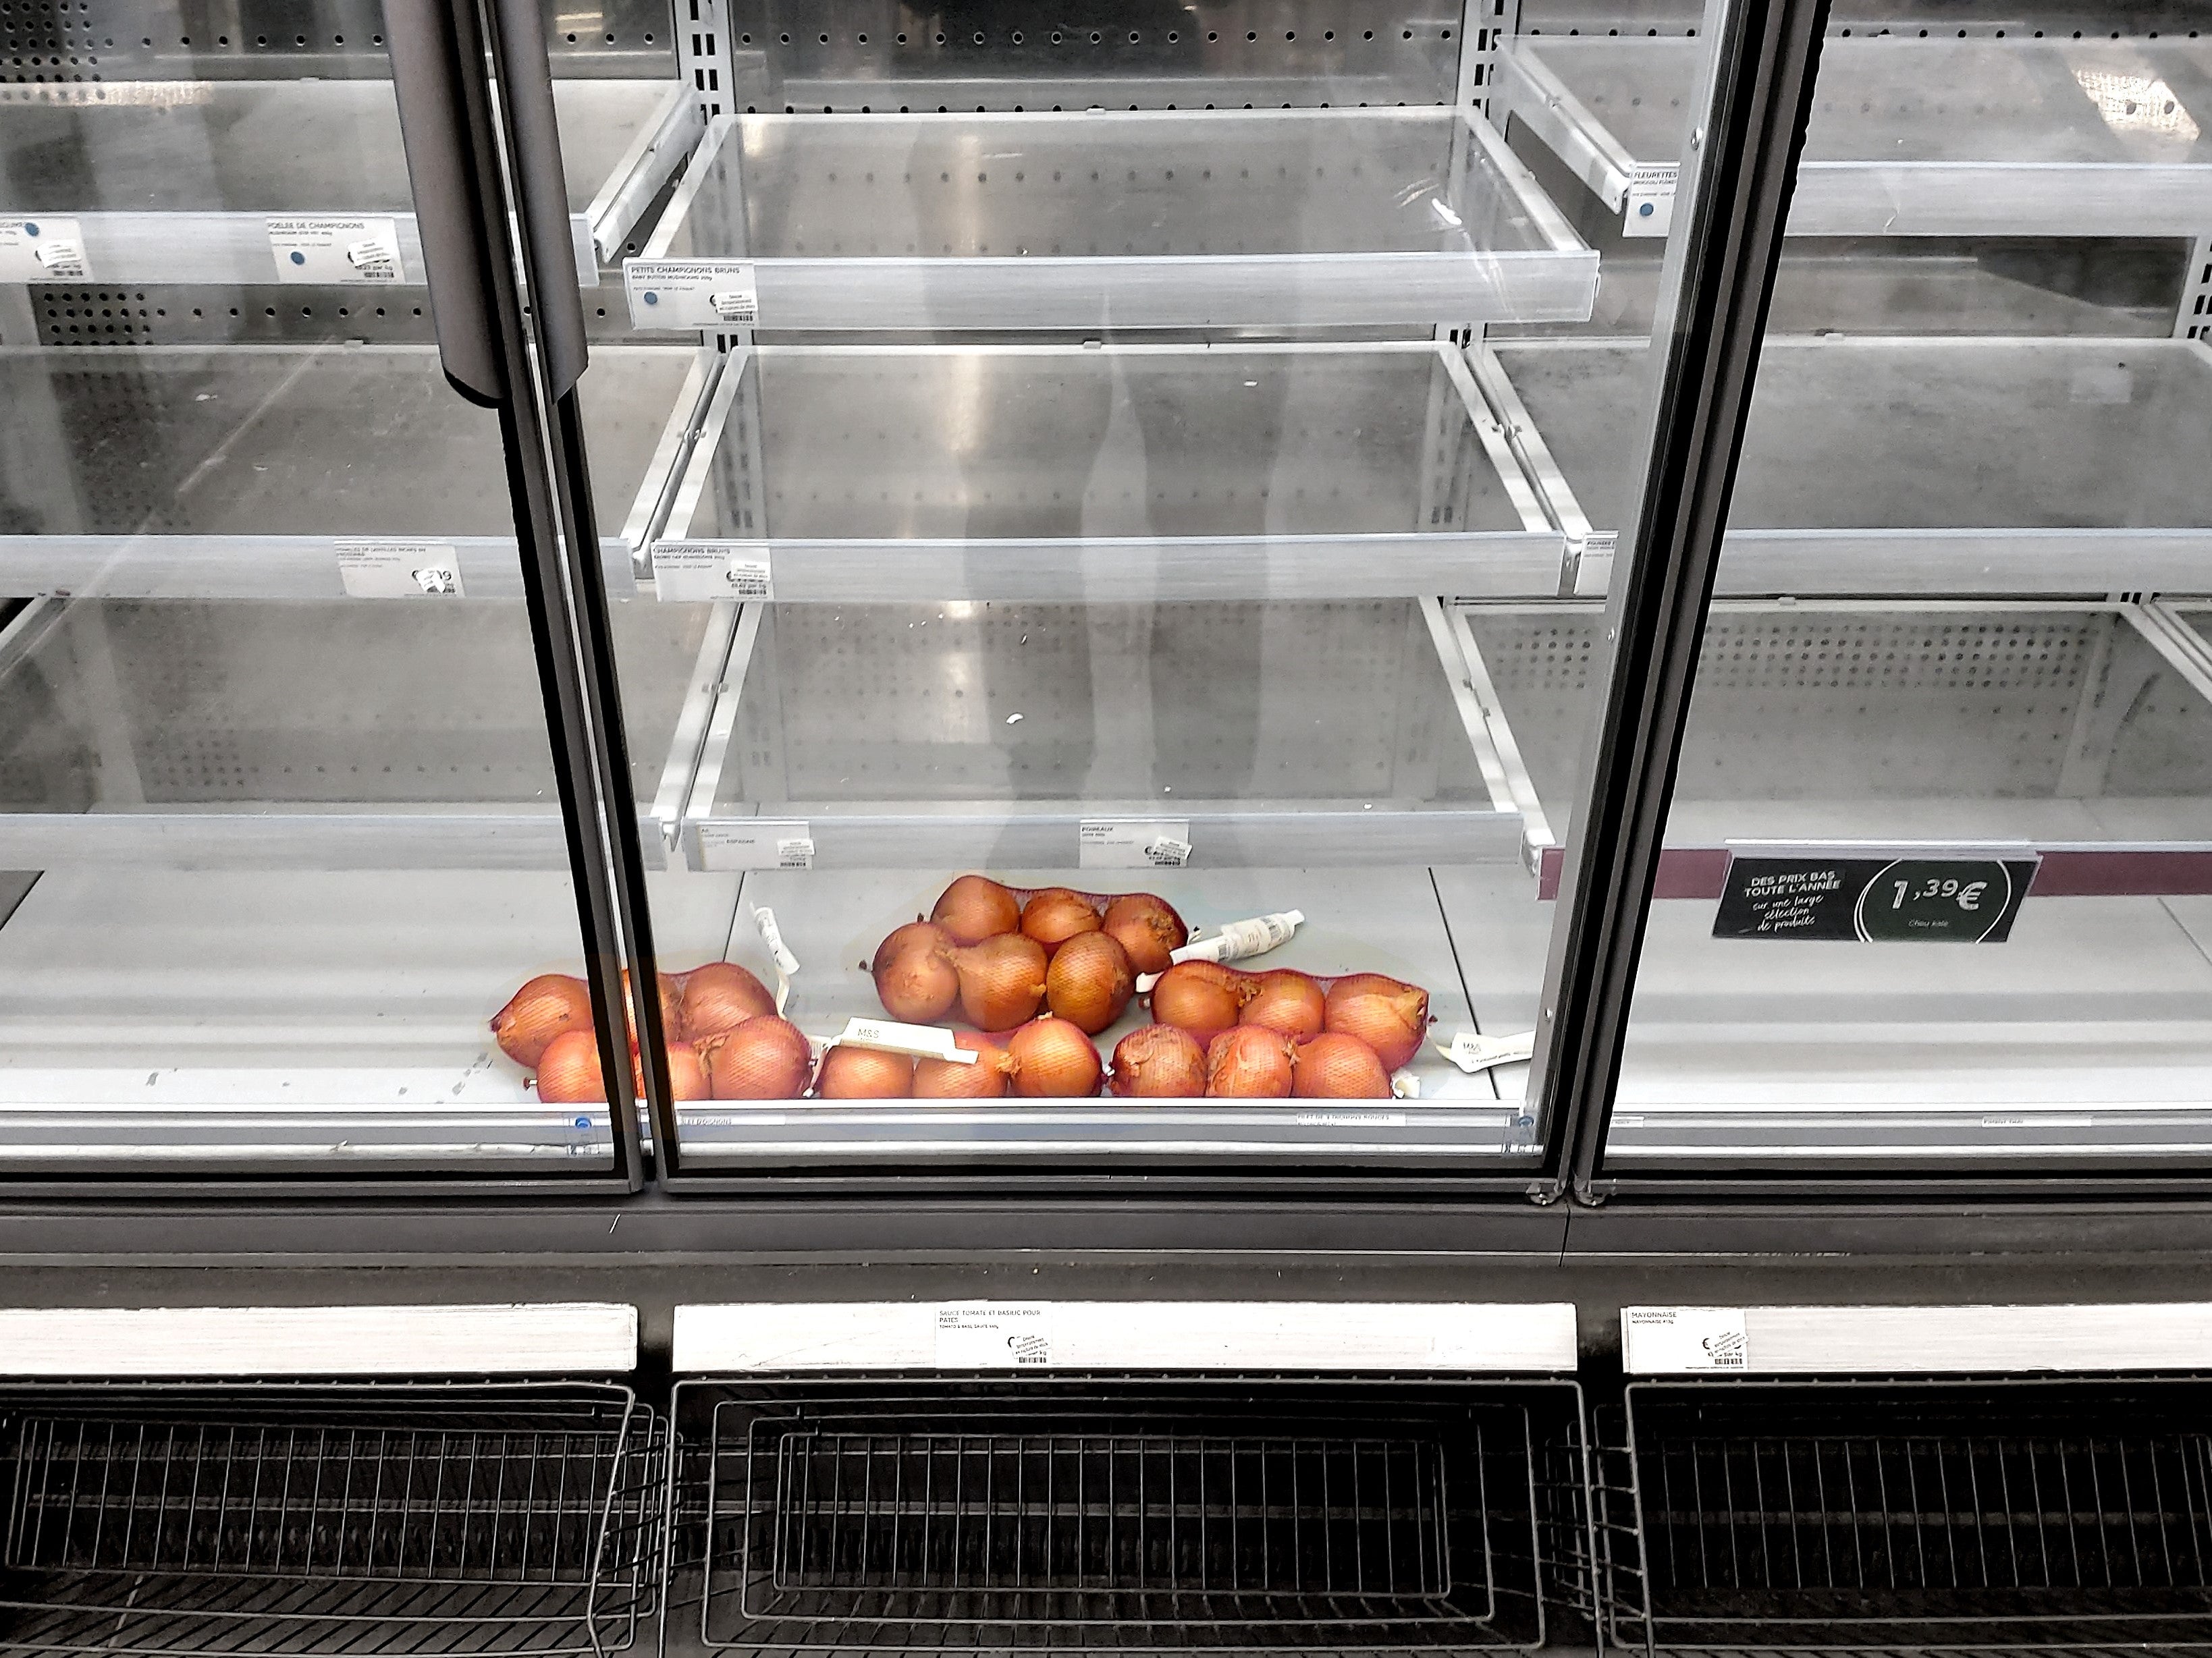 A few strings of onions are all that fills a chilled food section at Marks and Spencer on Boulevard Saint-Michel in Paris, 14 January, 2021